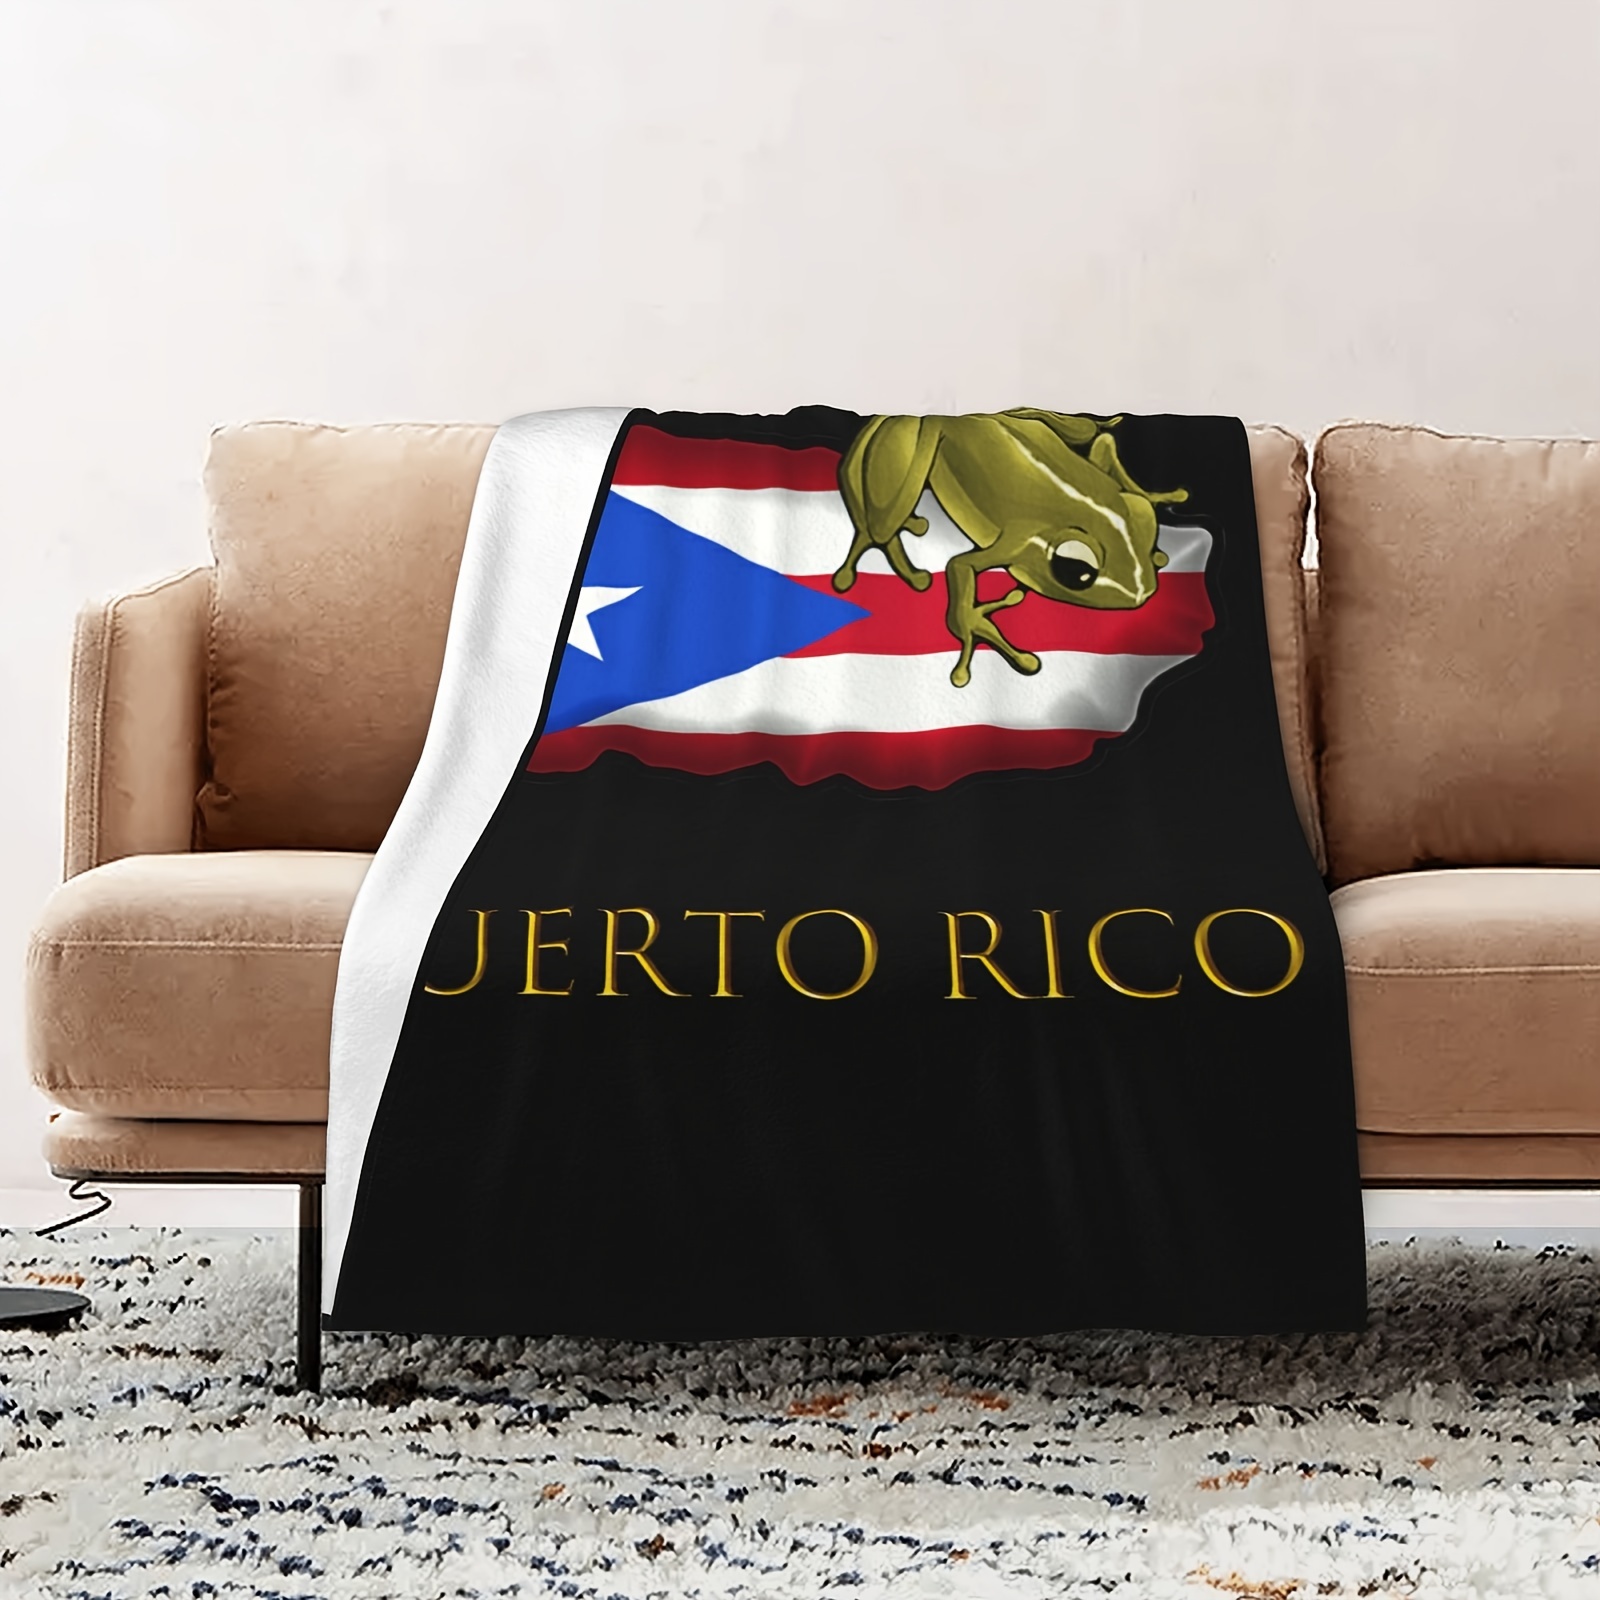 

Puerto Rico Flag & Coqui Frog Print Flannel Throw Blanket - Soft, Warm, And Versatile For All Seasons - Perfect Gift For Weddings, Birthdays, And Friends